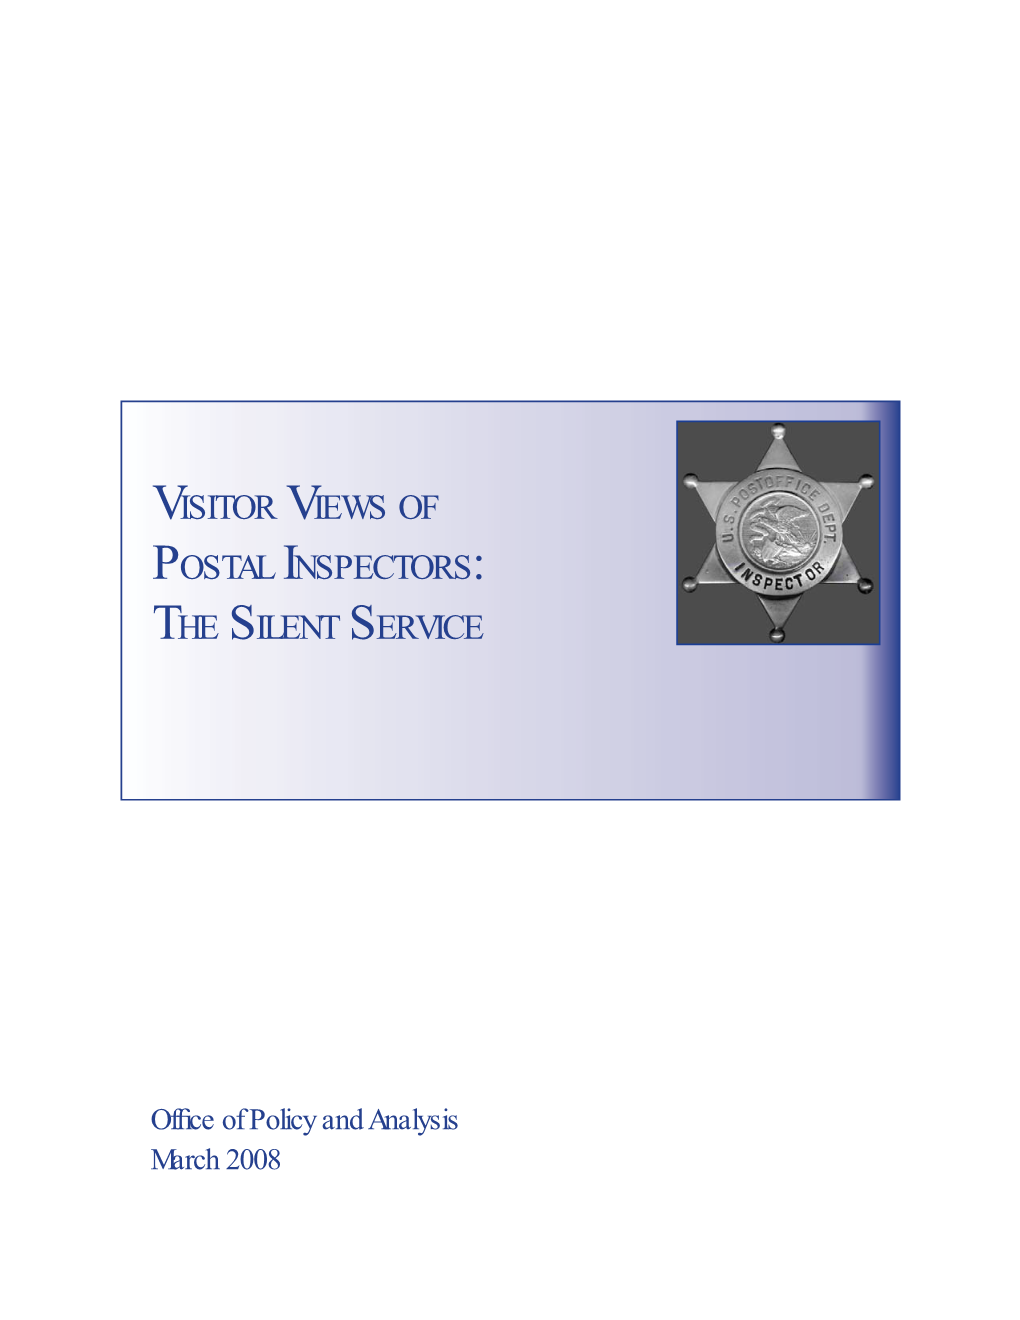 Visitor Views of Postal Inspectors: the Silent Service